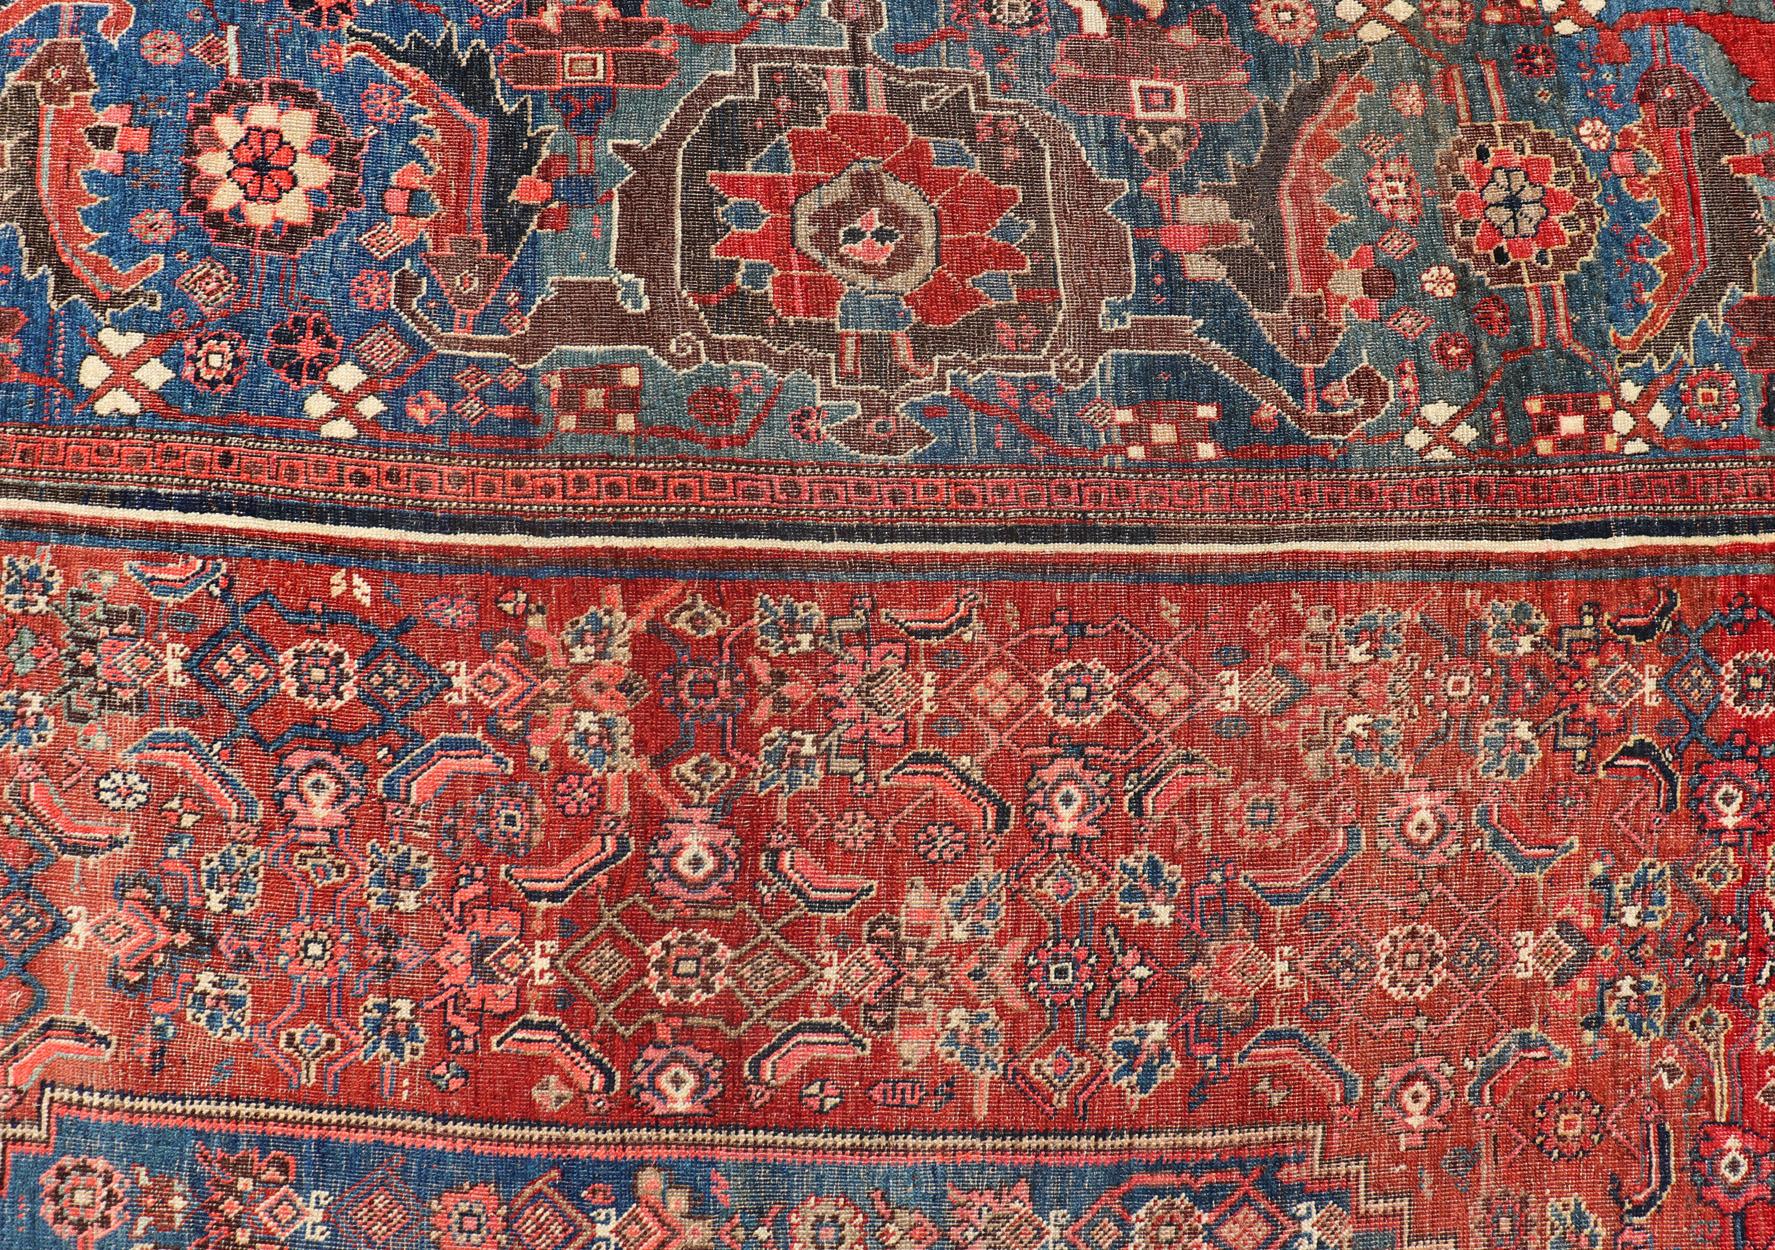 Very Large Antique Persian Bidjar Rug in Multi Shades of Blue, Tera-Cotta & Red For Sale 1